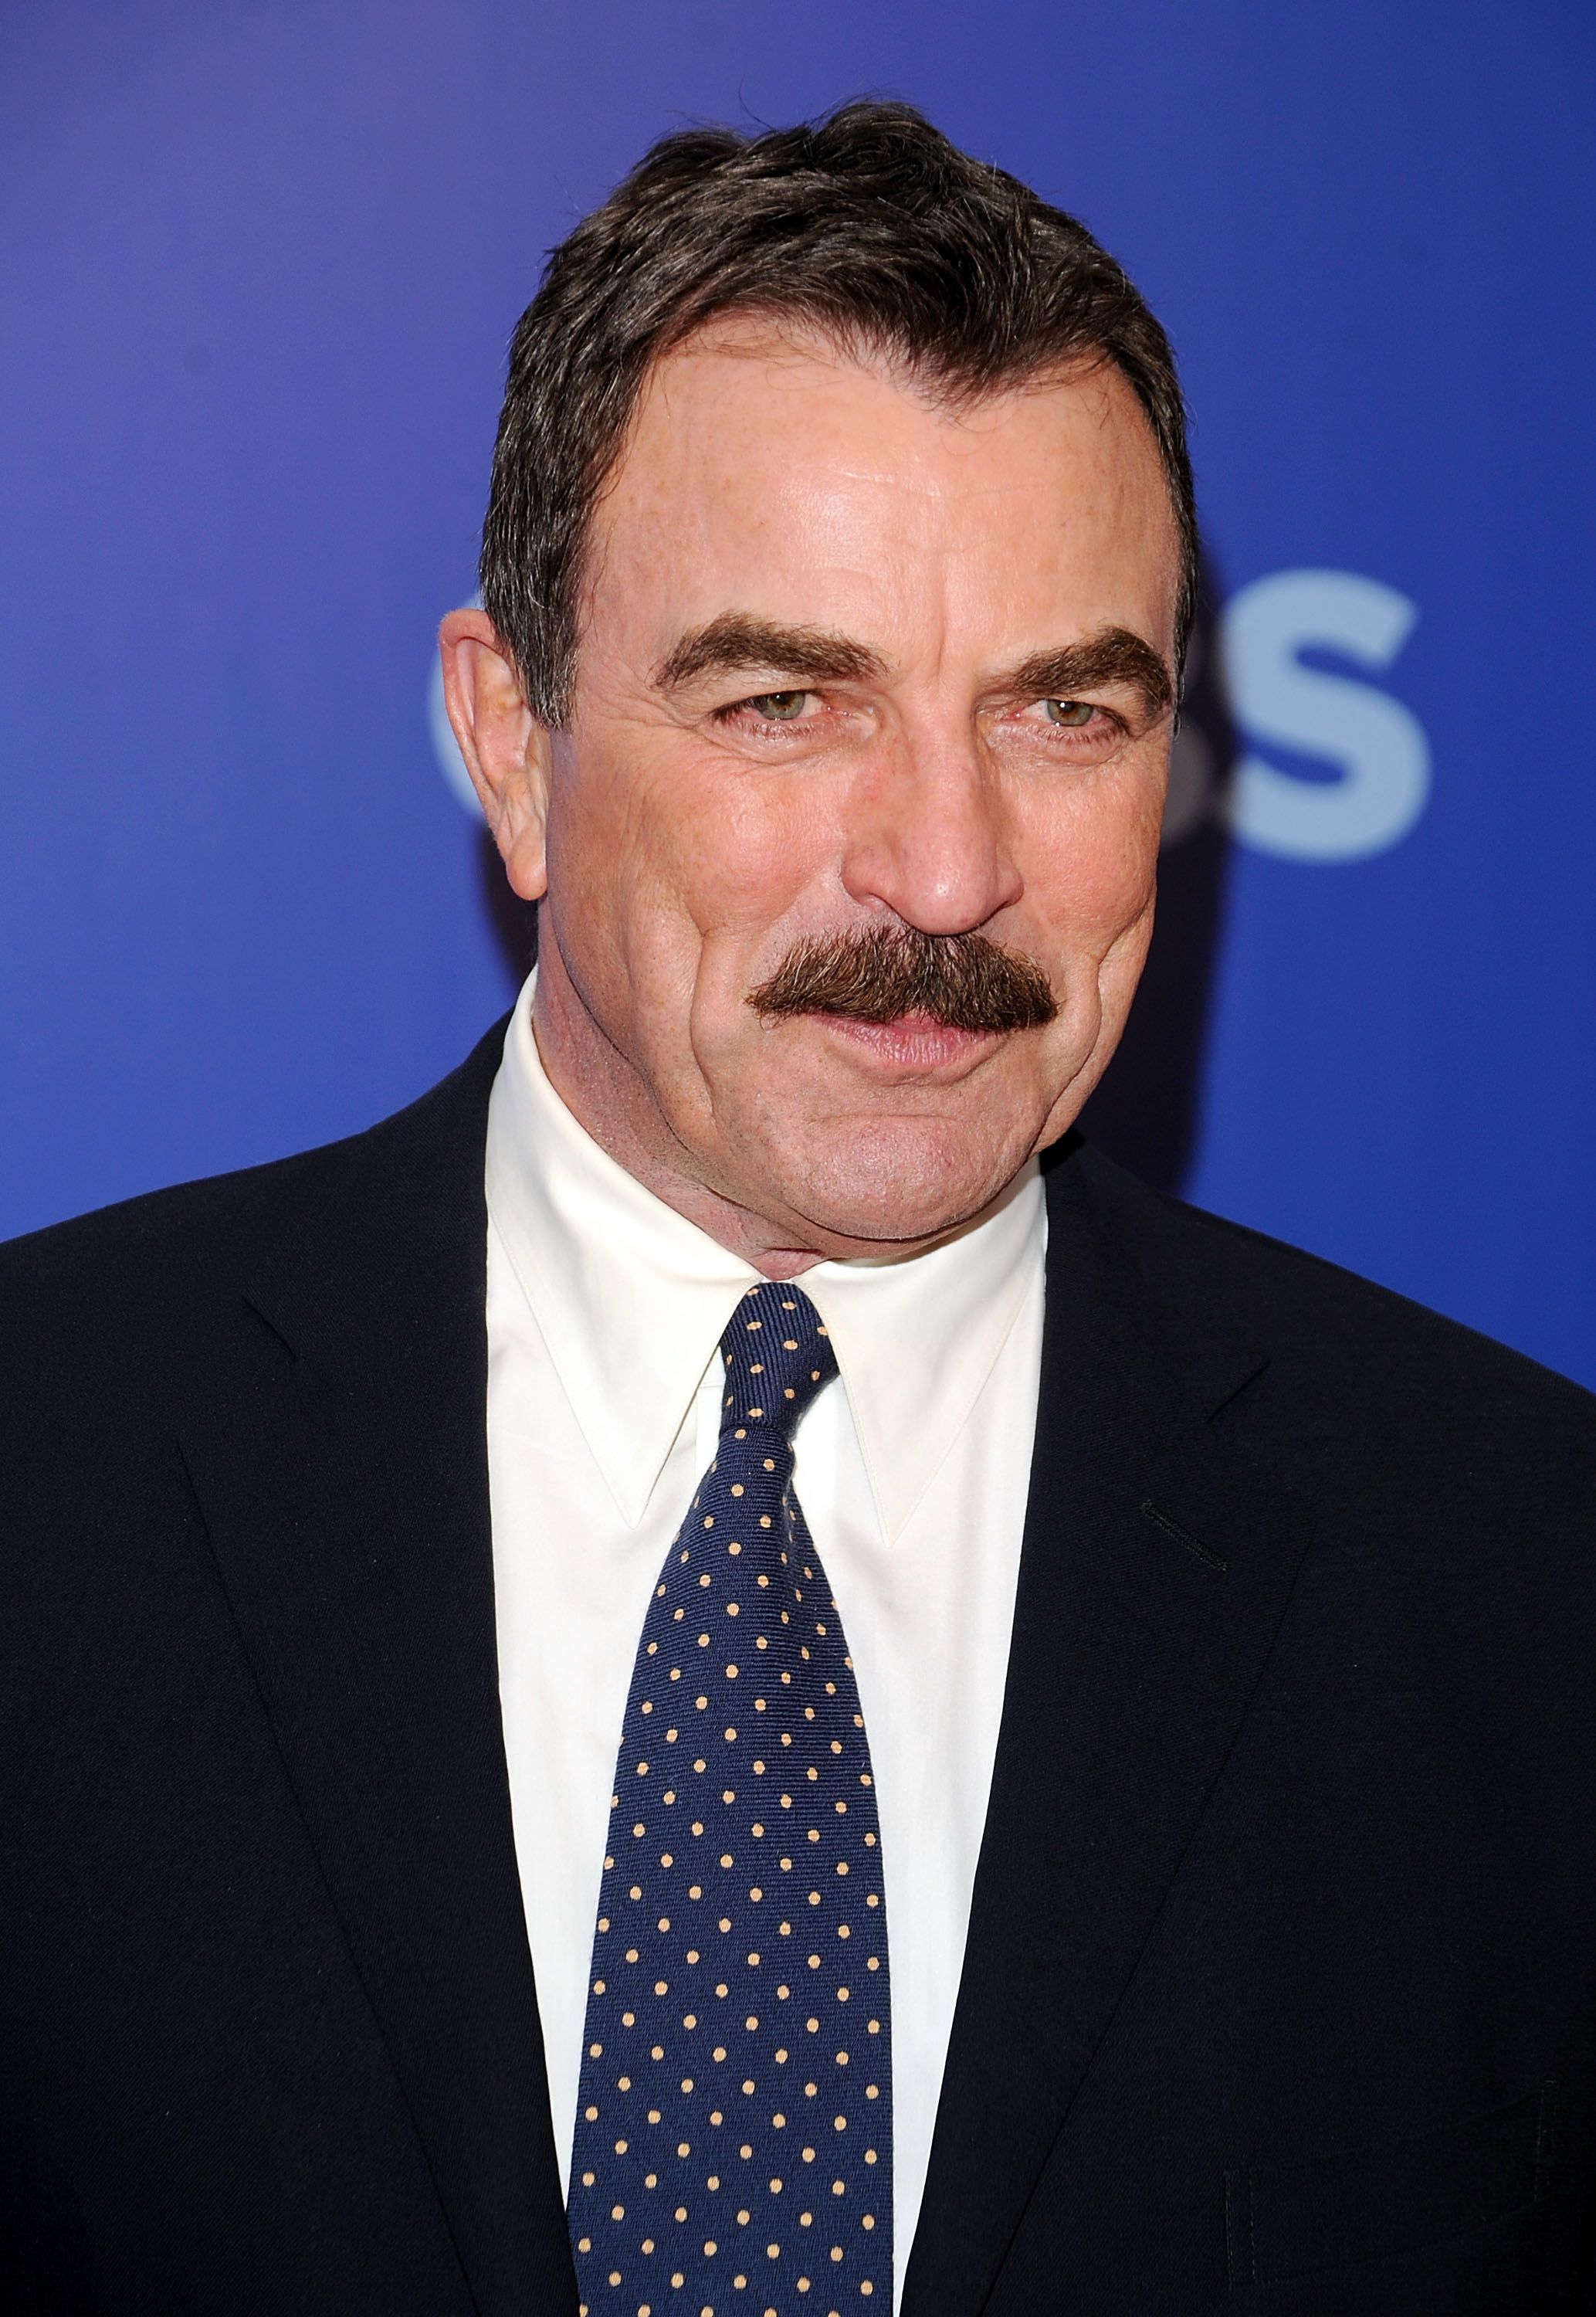 Tom Selleck at CBS UpFront at Damrosch Park, Lincoln Center on May 19, 2010, in New York City | Photo: Getty Images